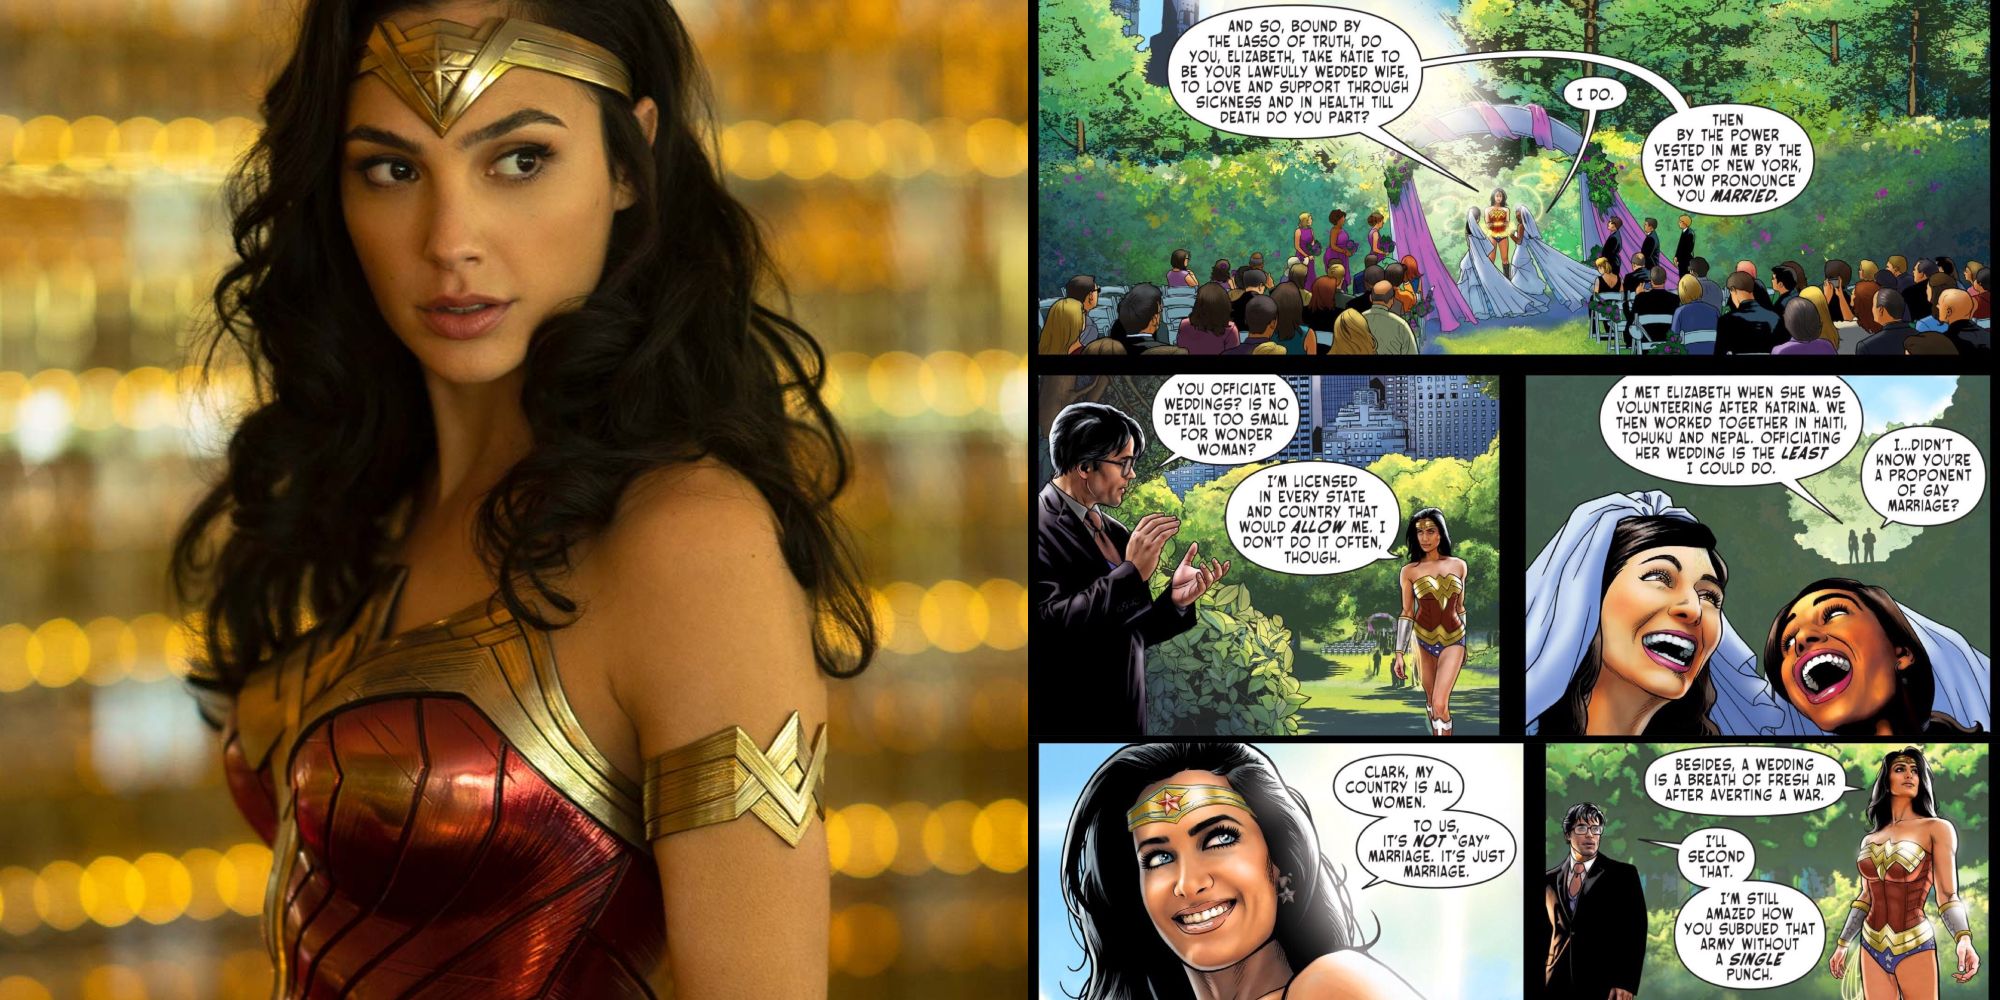 Gal Gadot in Wonder Woman 1984 and officiating lesbian wedding in comic with Clark Kent